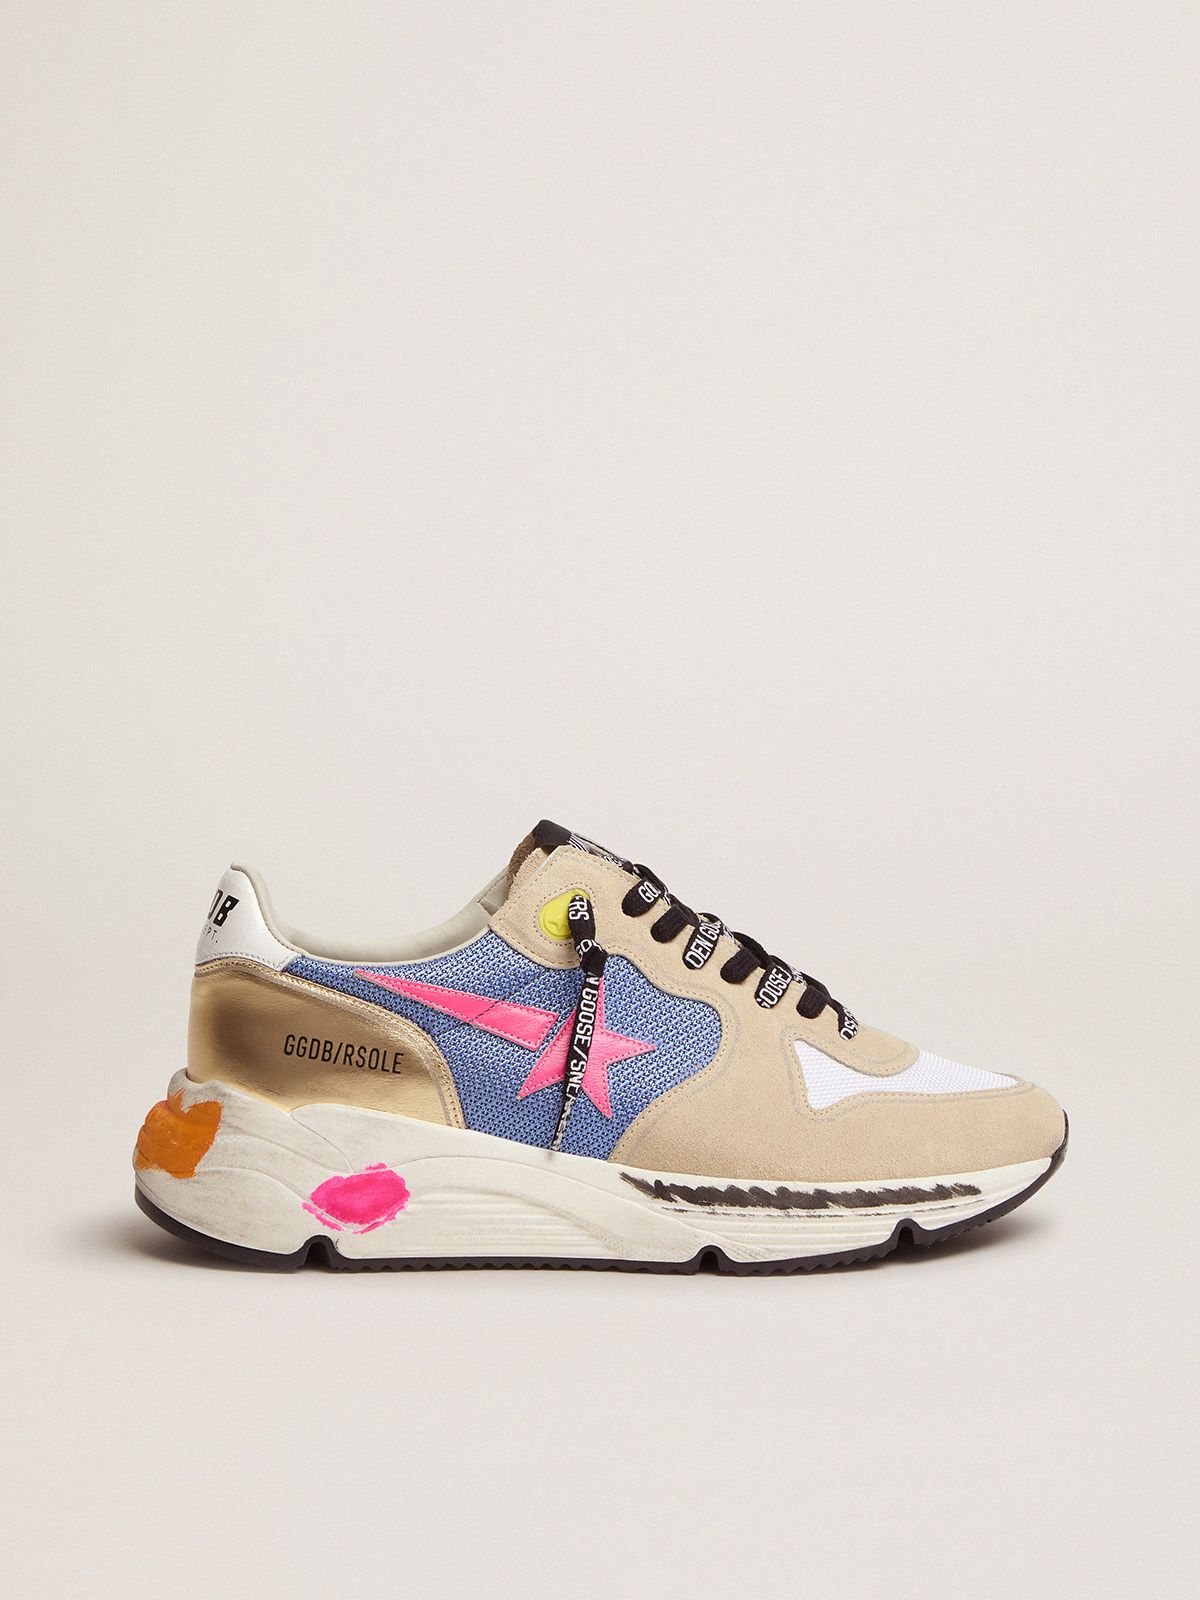 golden goose detail Sole with Running suede sneakers in gold